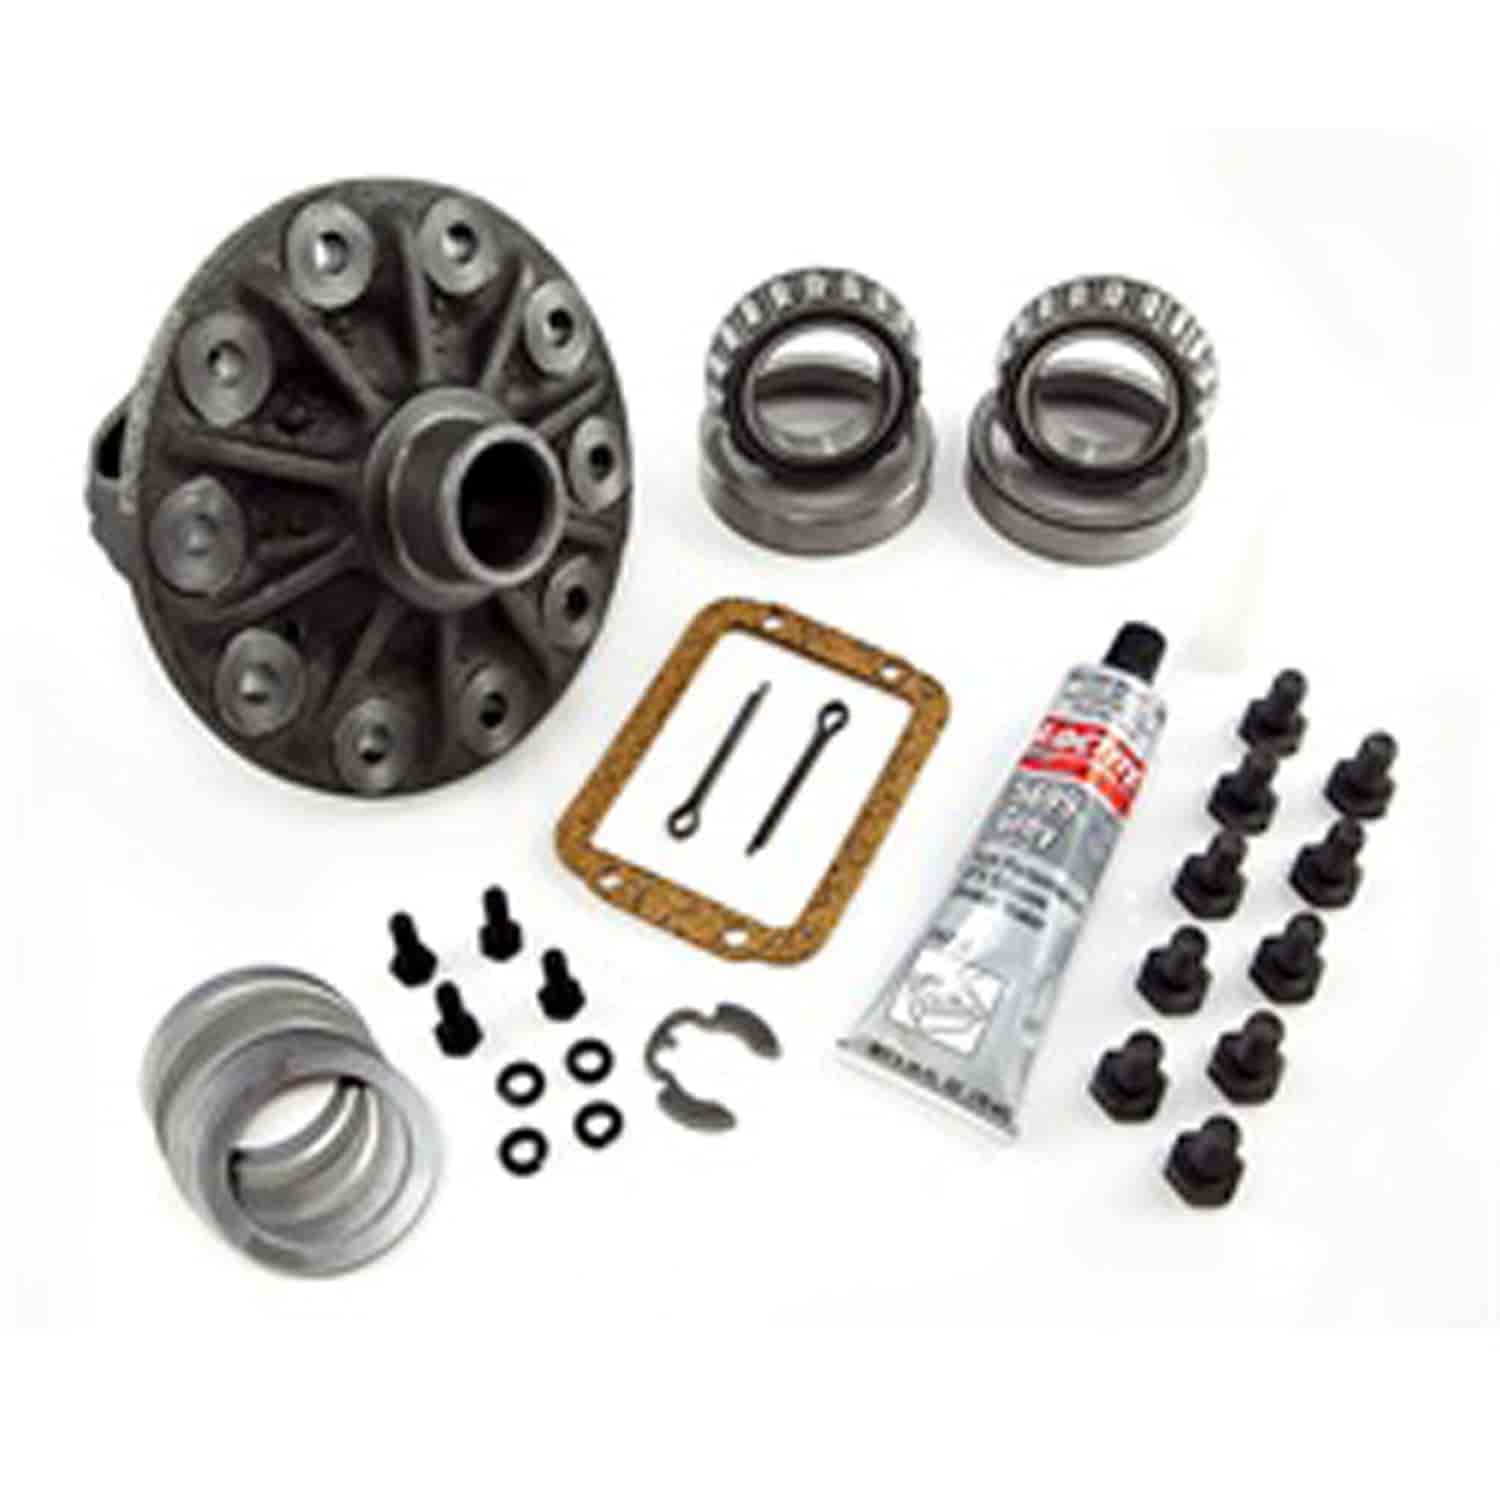 This standard differential case assembly kit from Omix-ADA